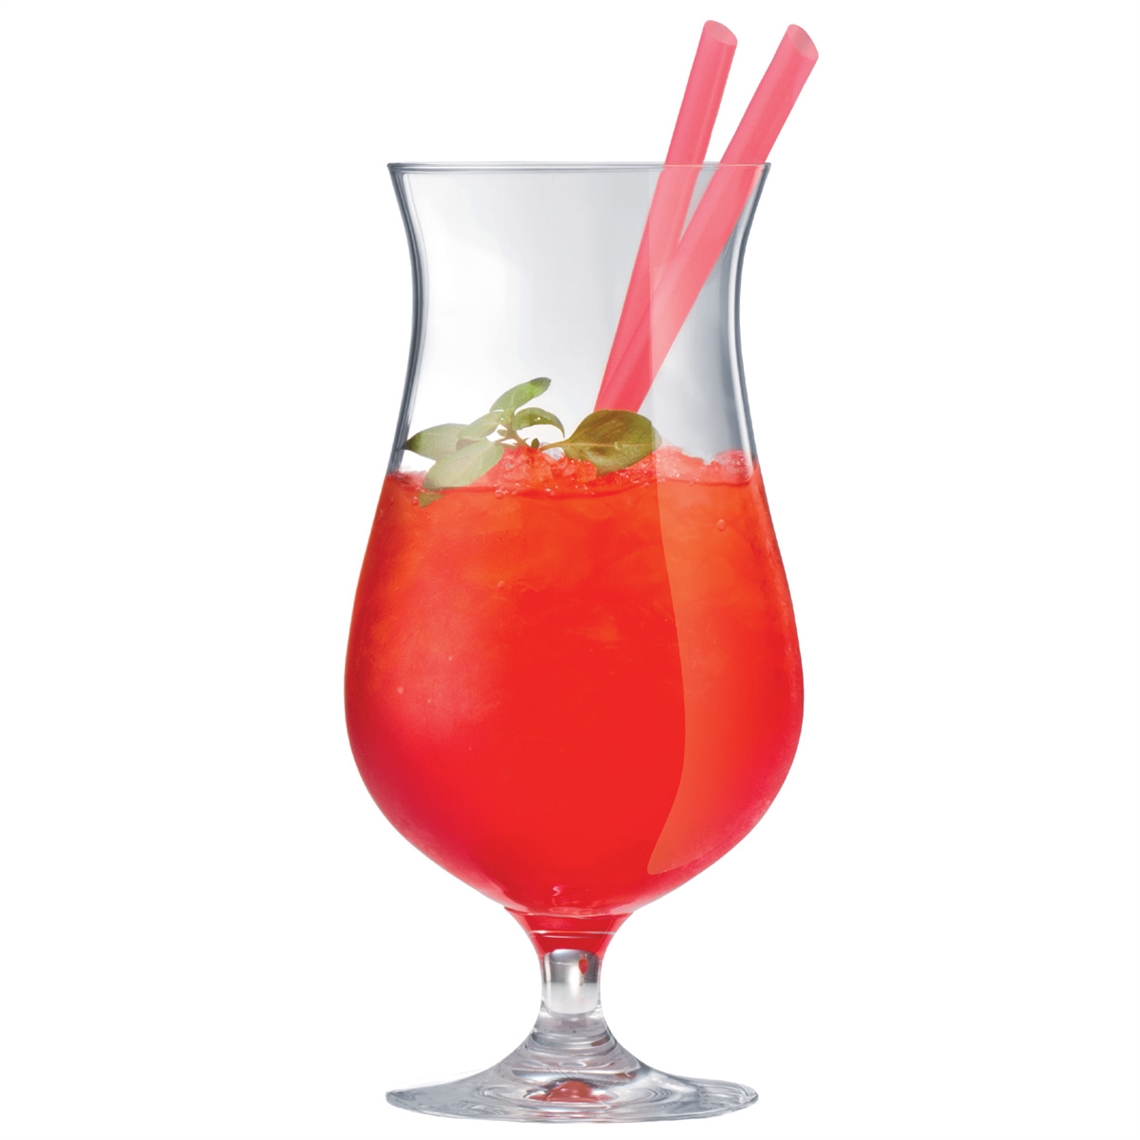 View more spiegelau definition from our Cocktail Glasses range